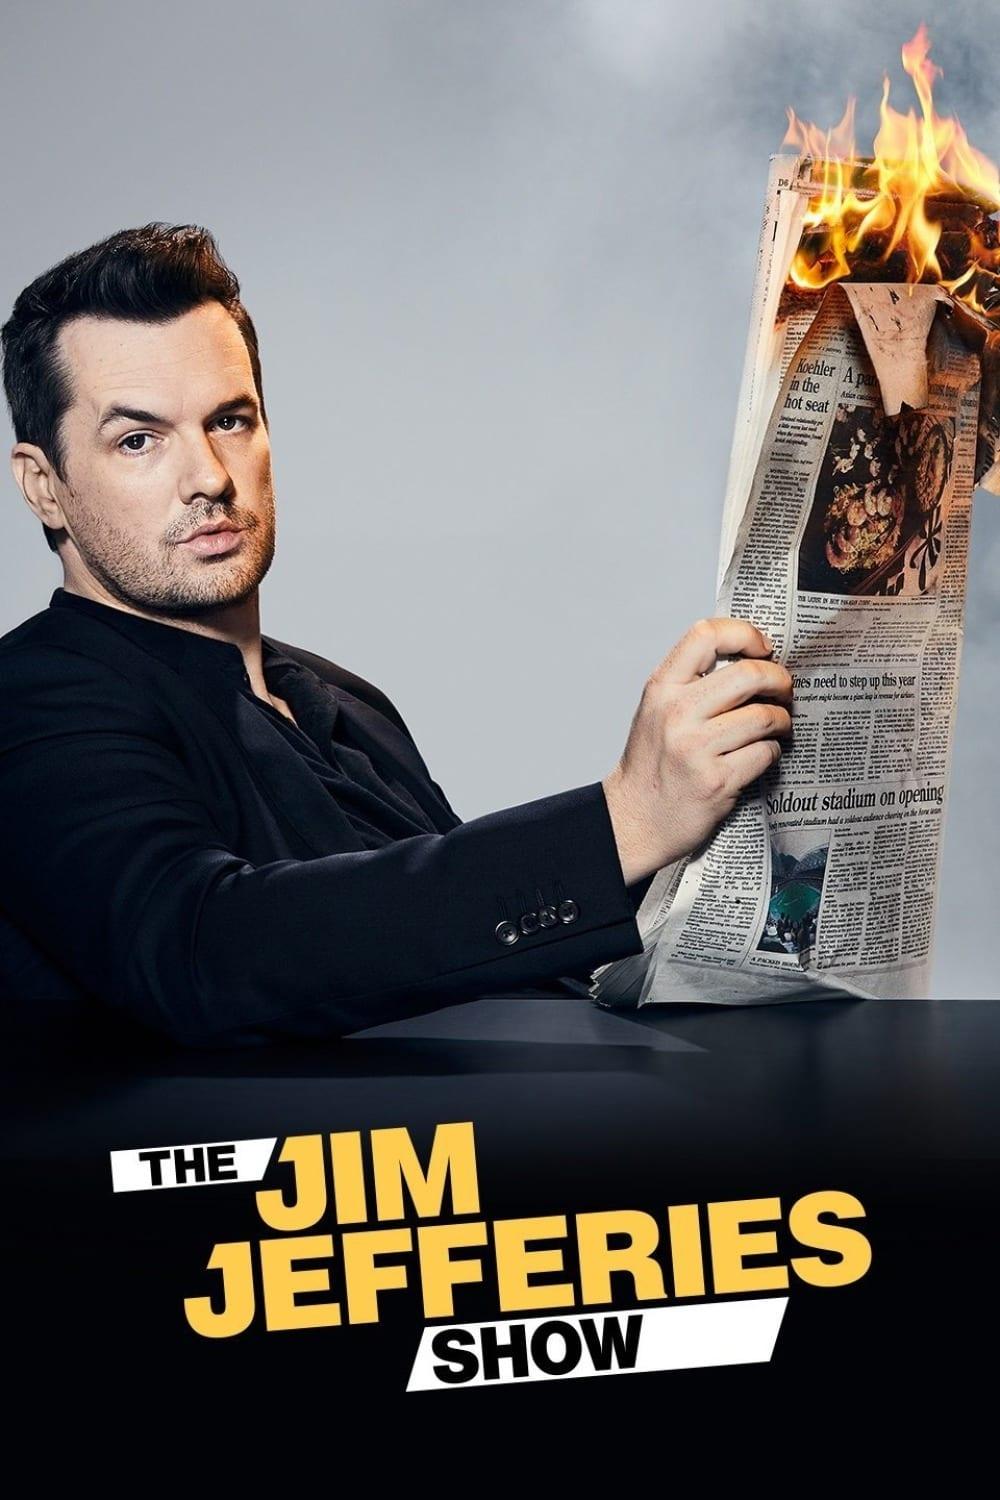 The Jim Jefferies Show poster